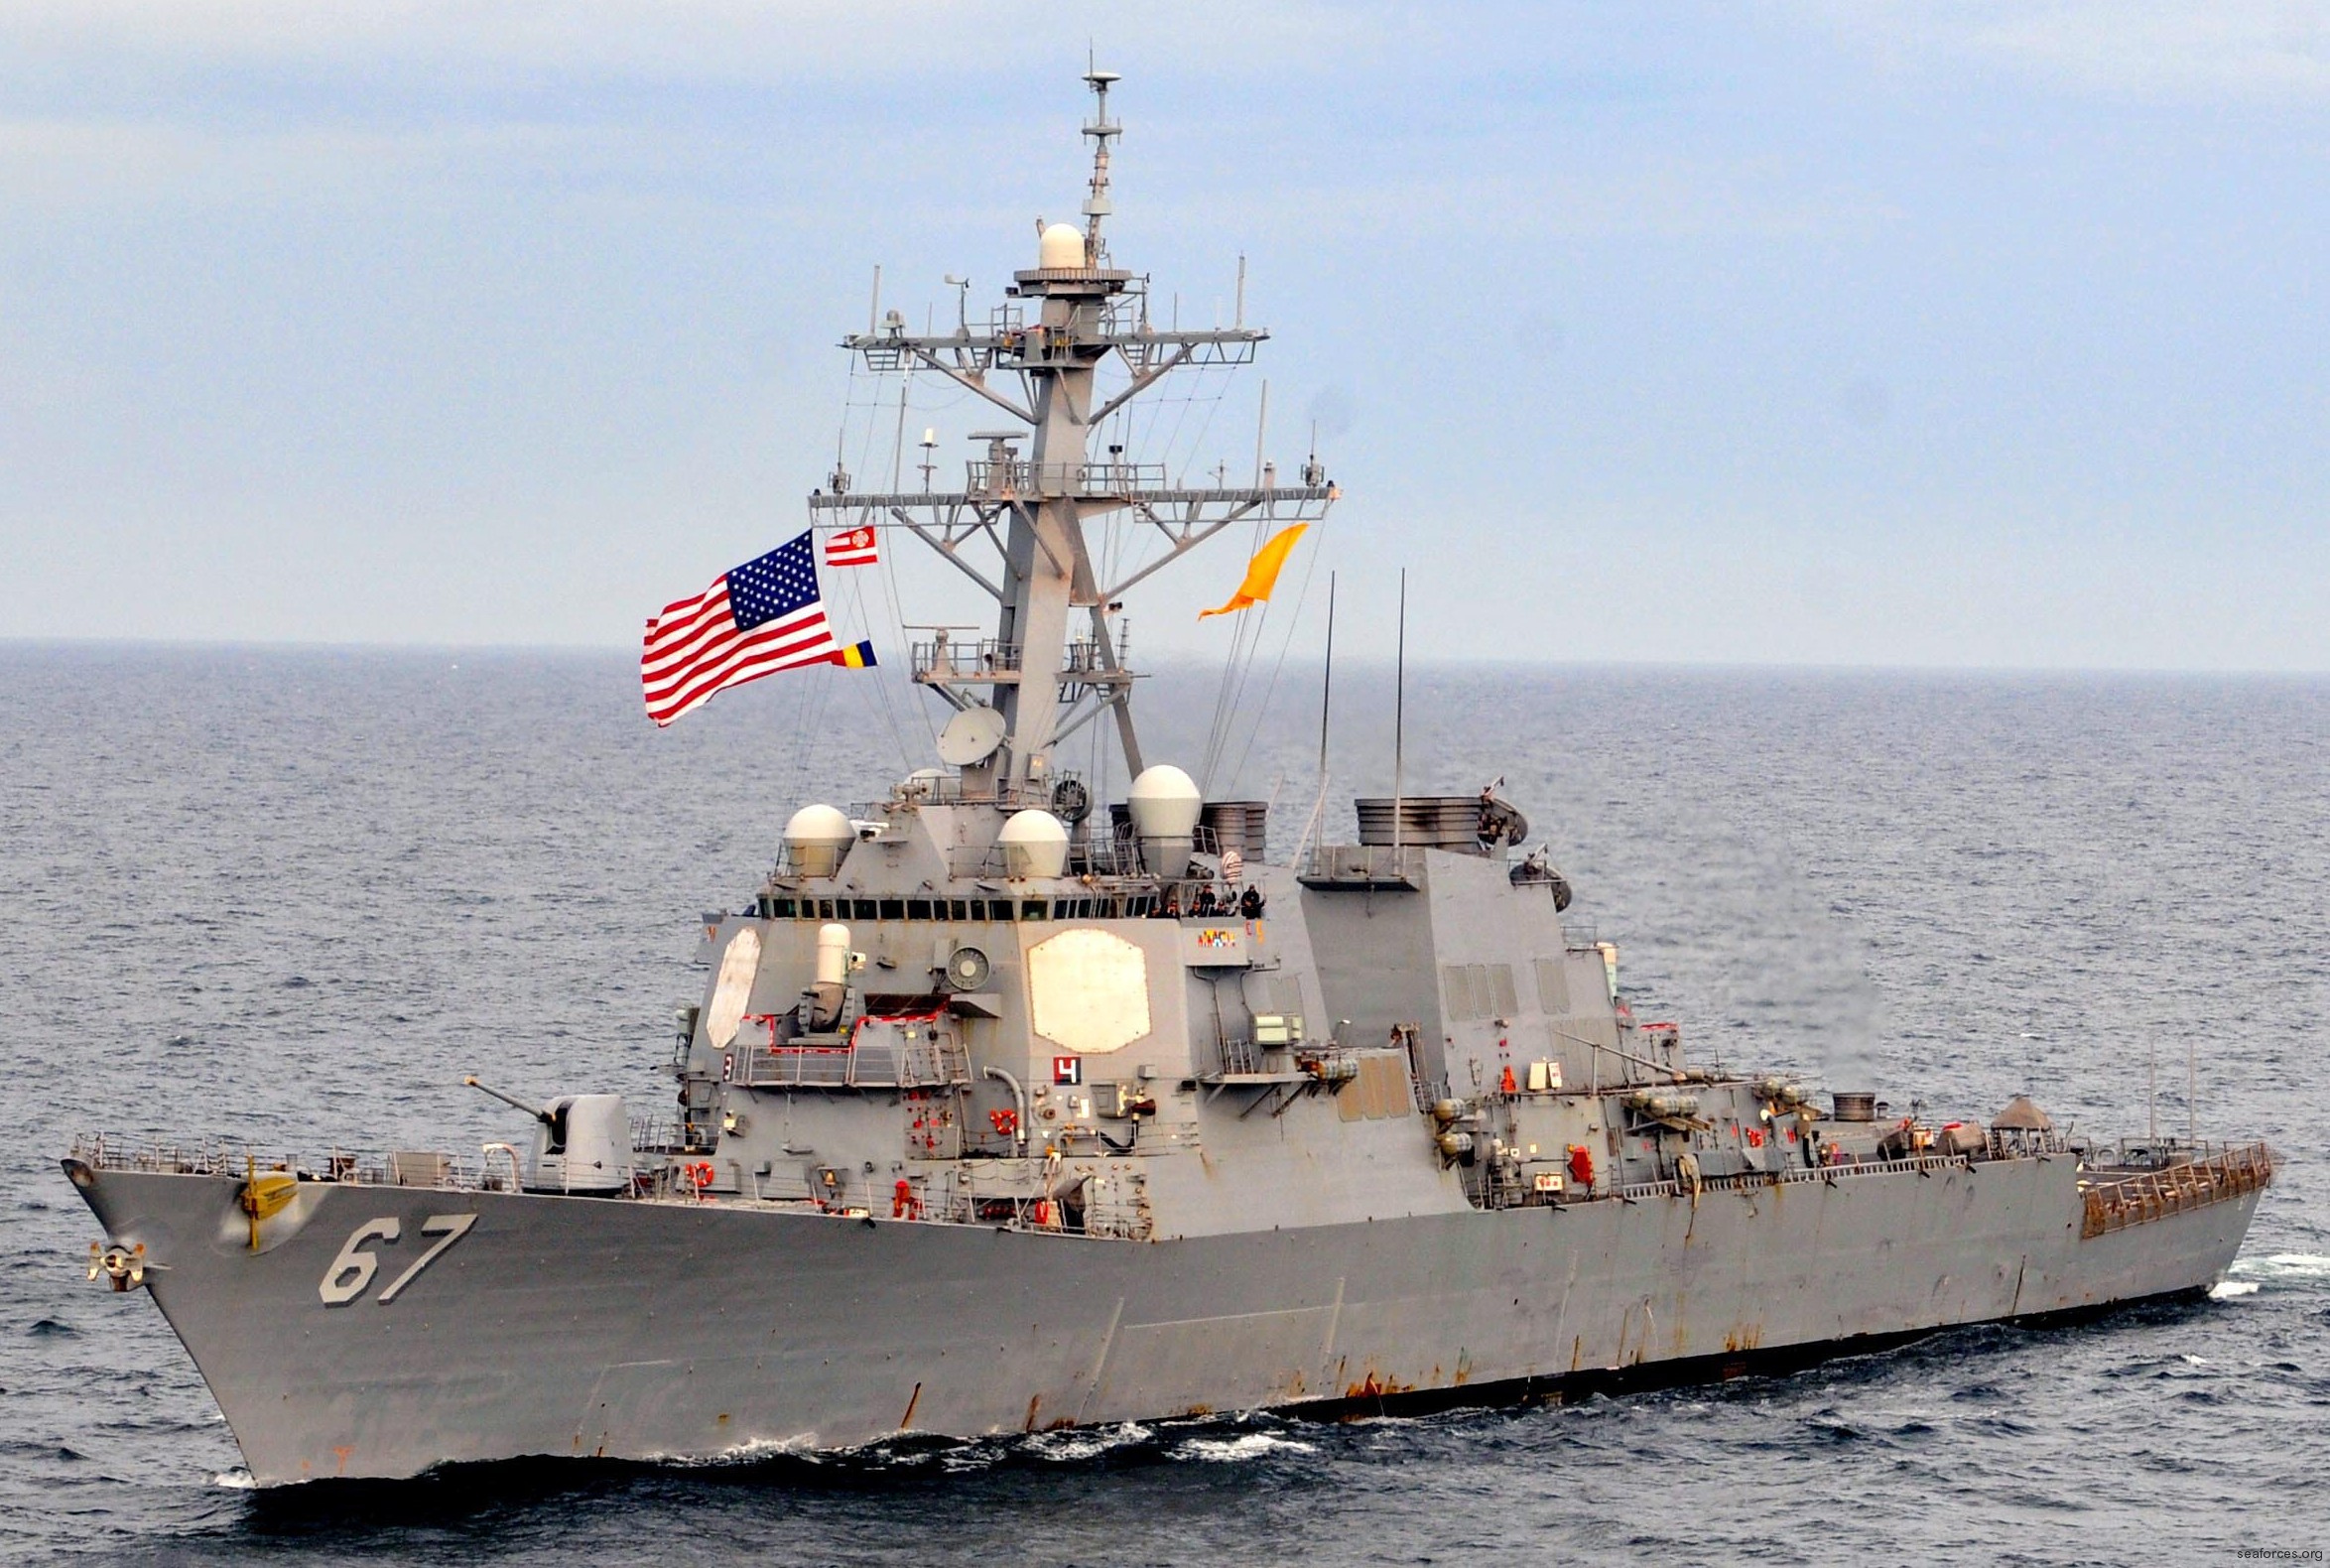 ddg-67 uss cole guided missile destroyer arleigh burke class navy aegis 17 black sea